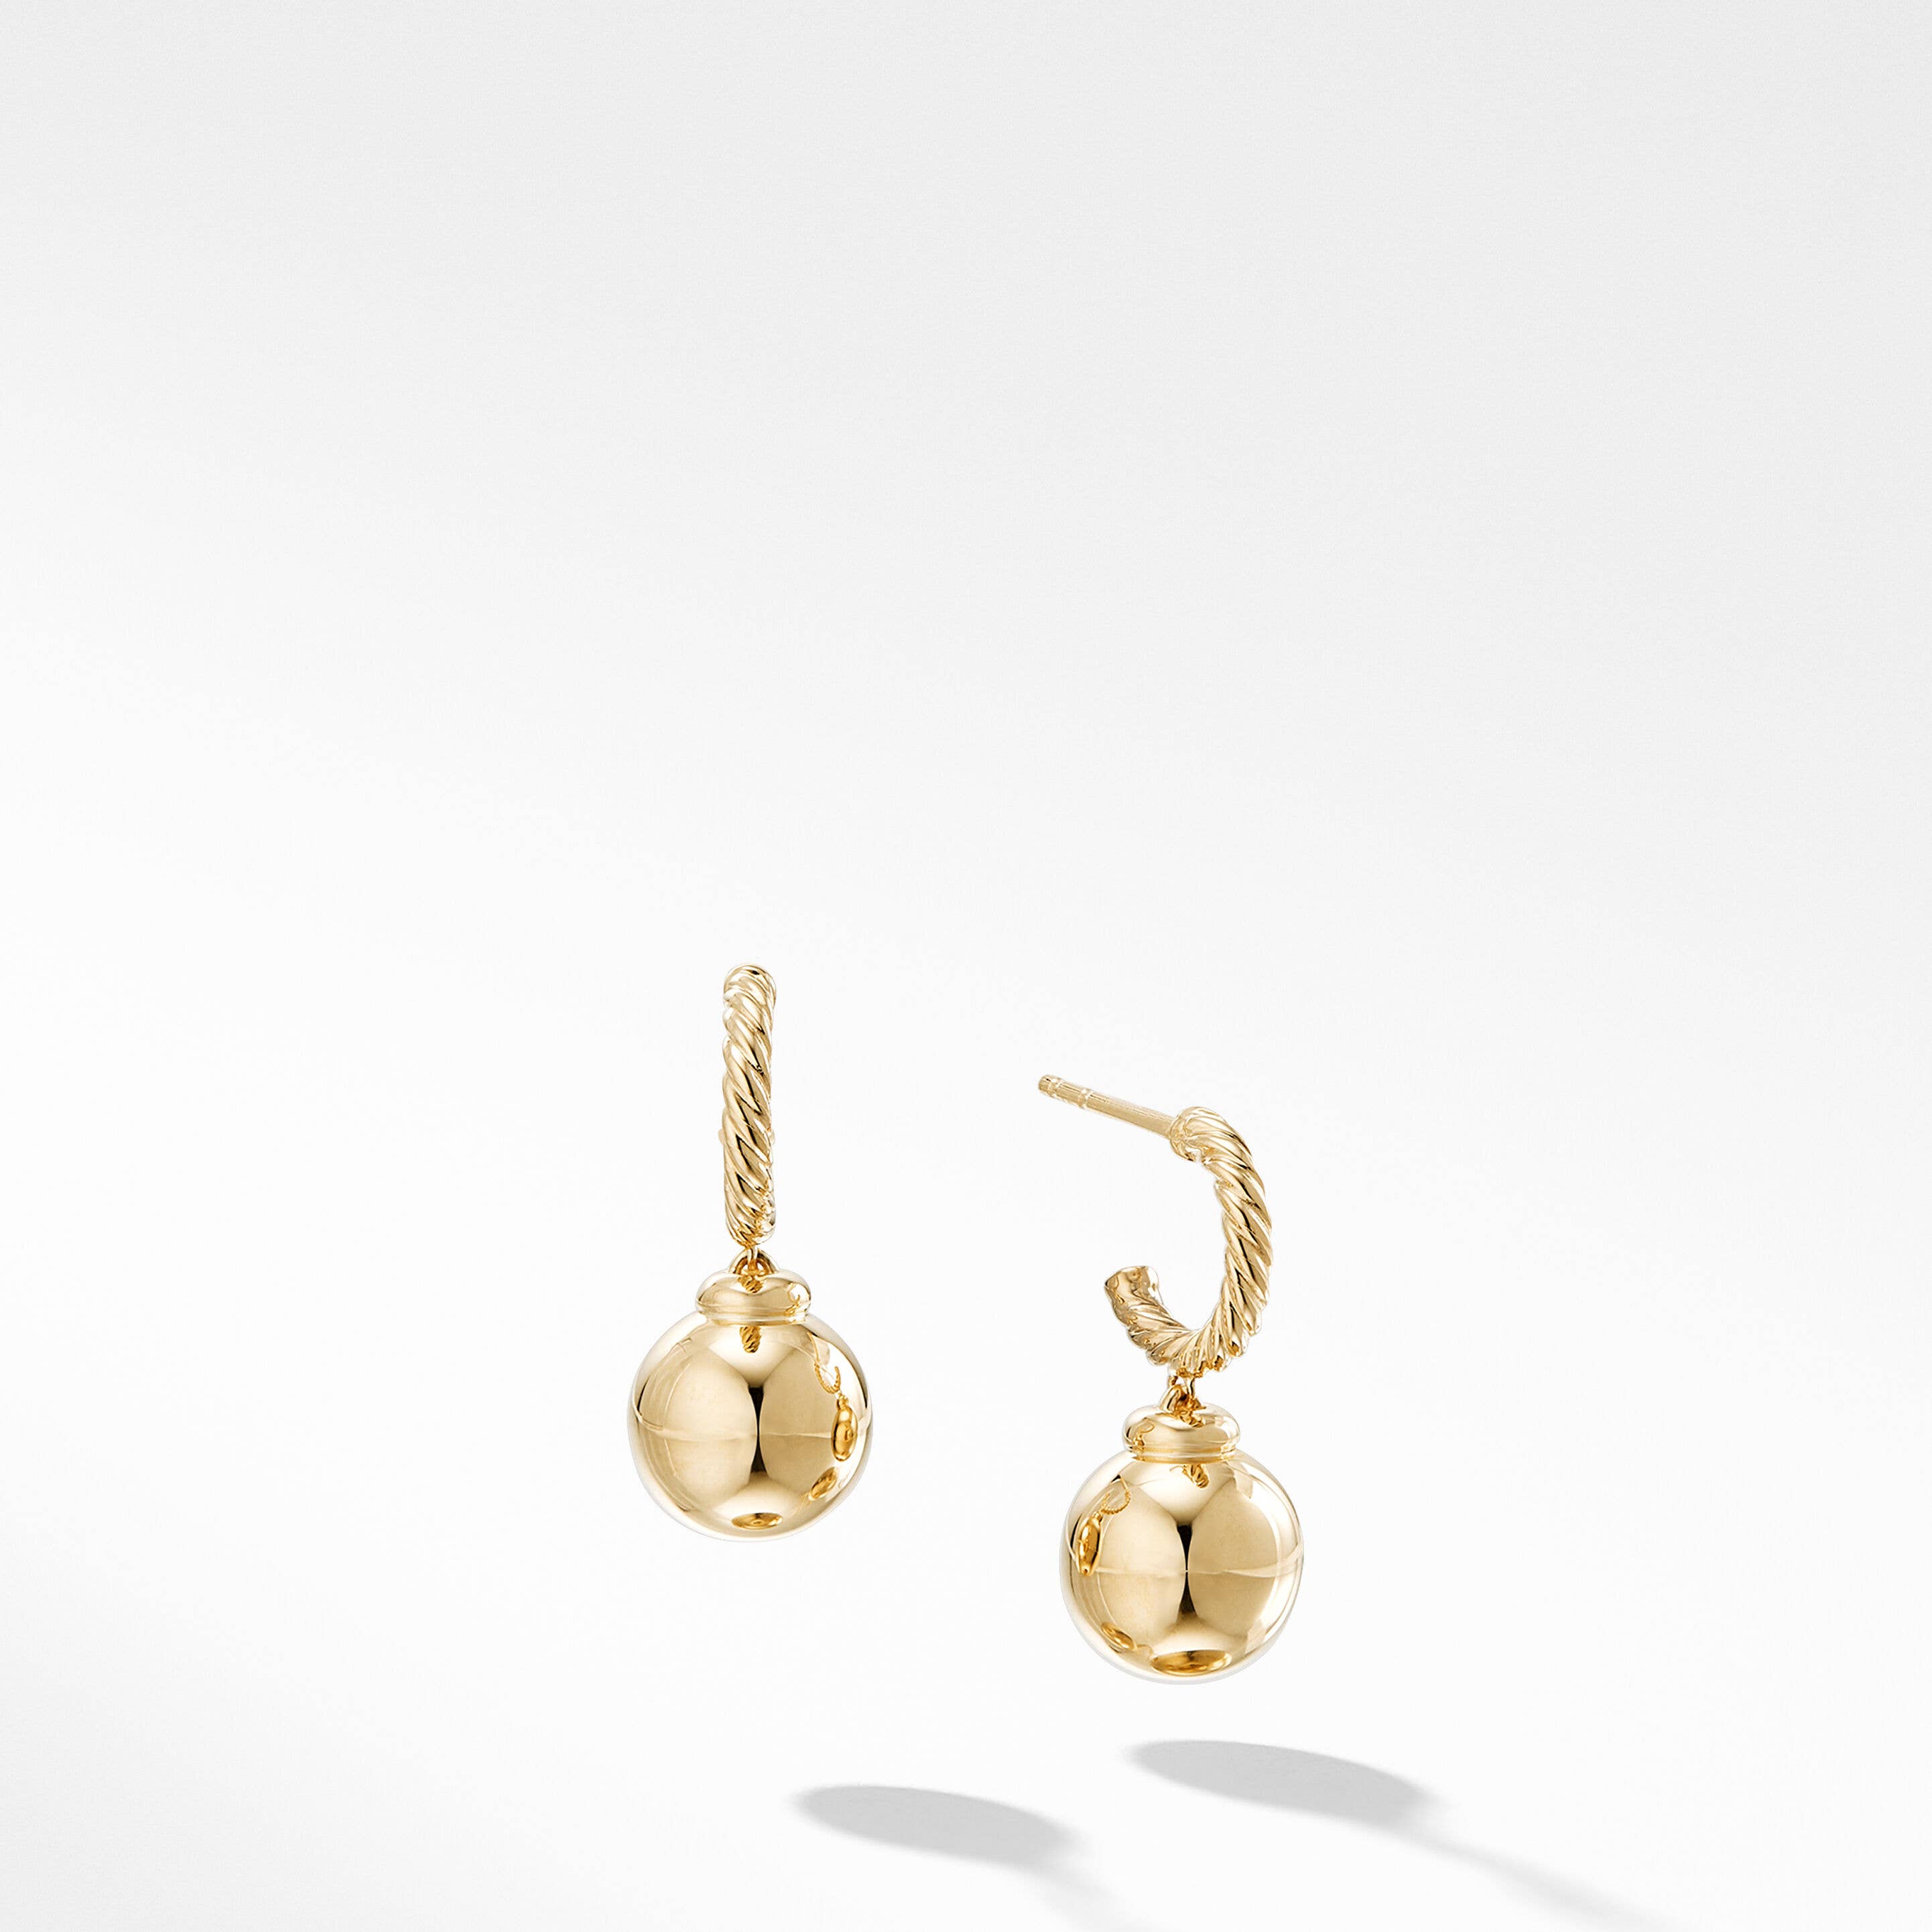 Solari Hoop Drop Earrings in 18K Yellow Gold with Gold Domes